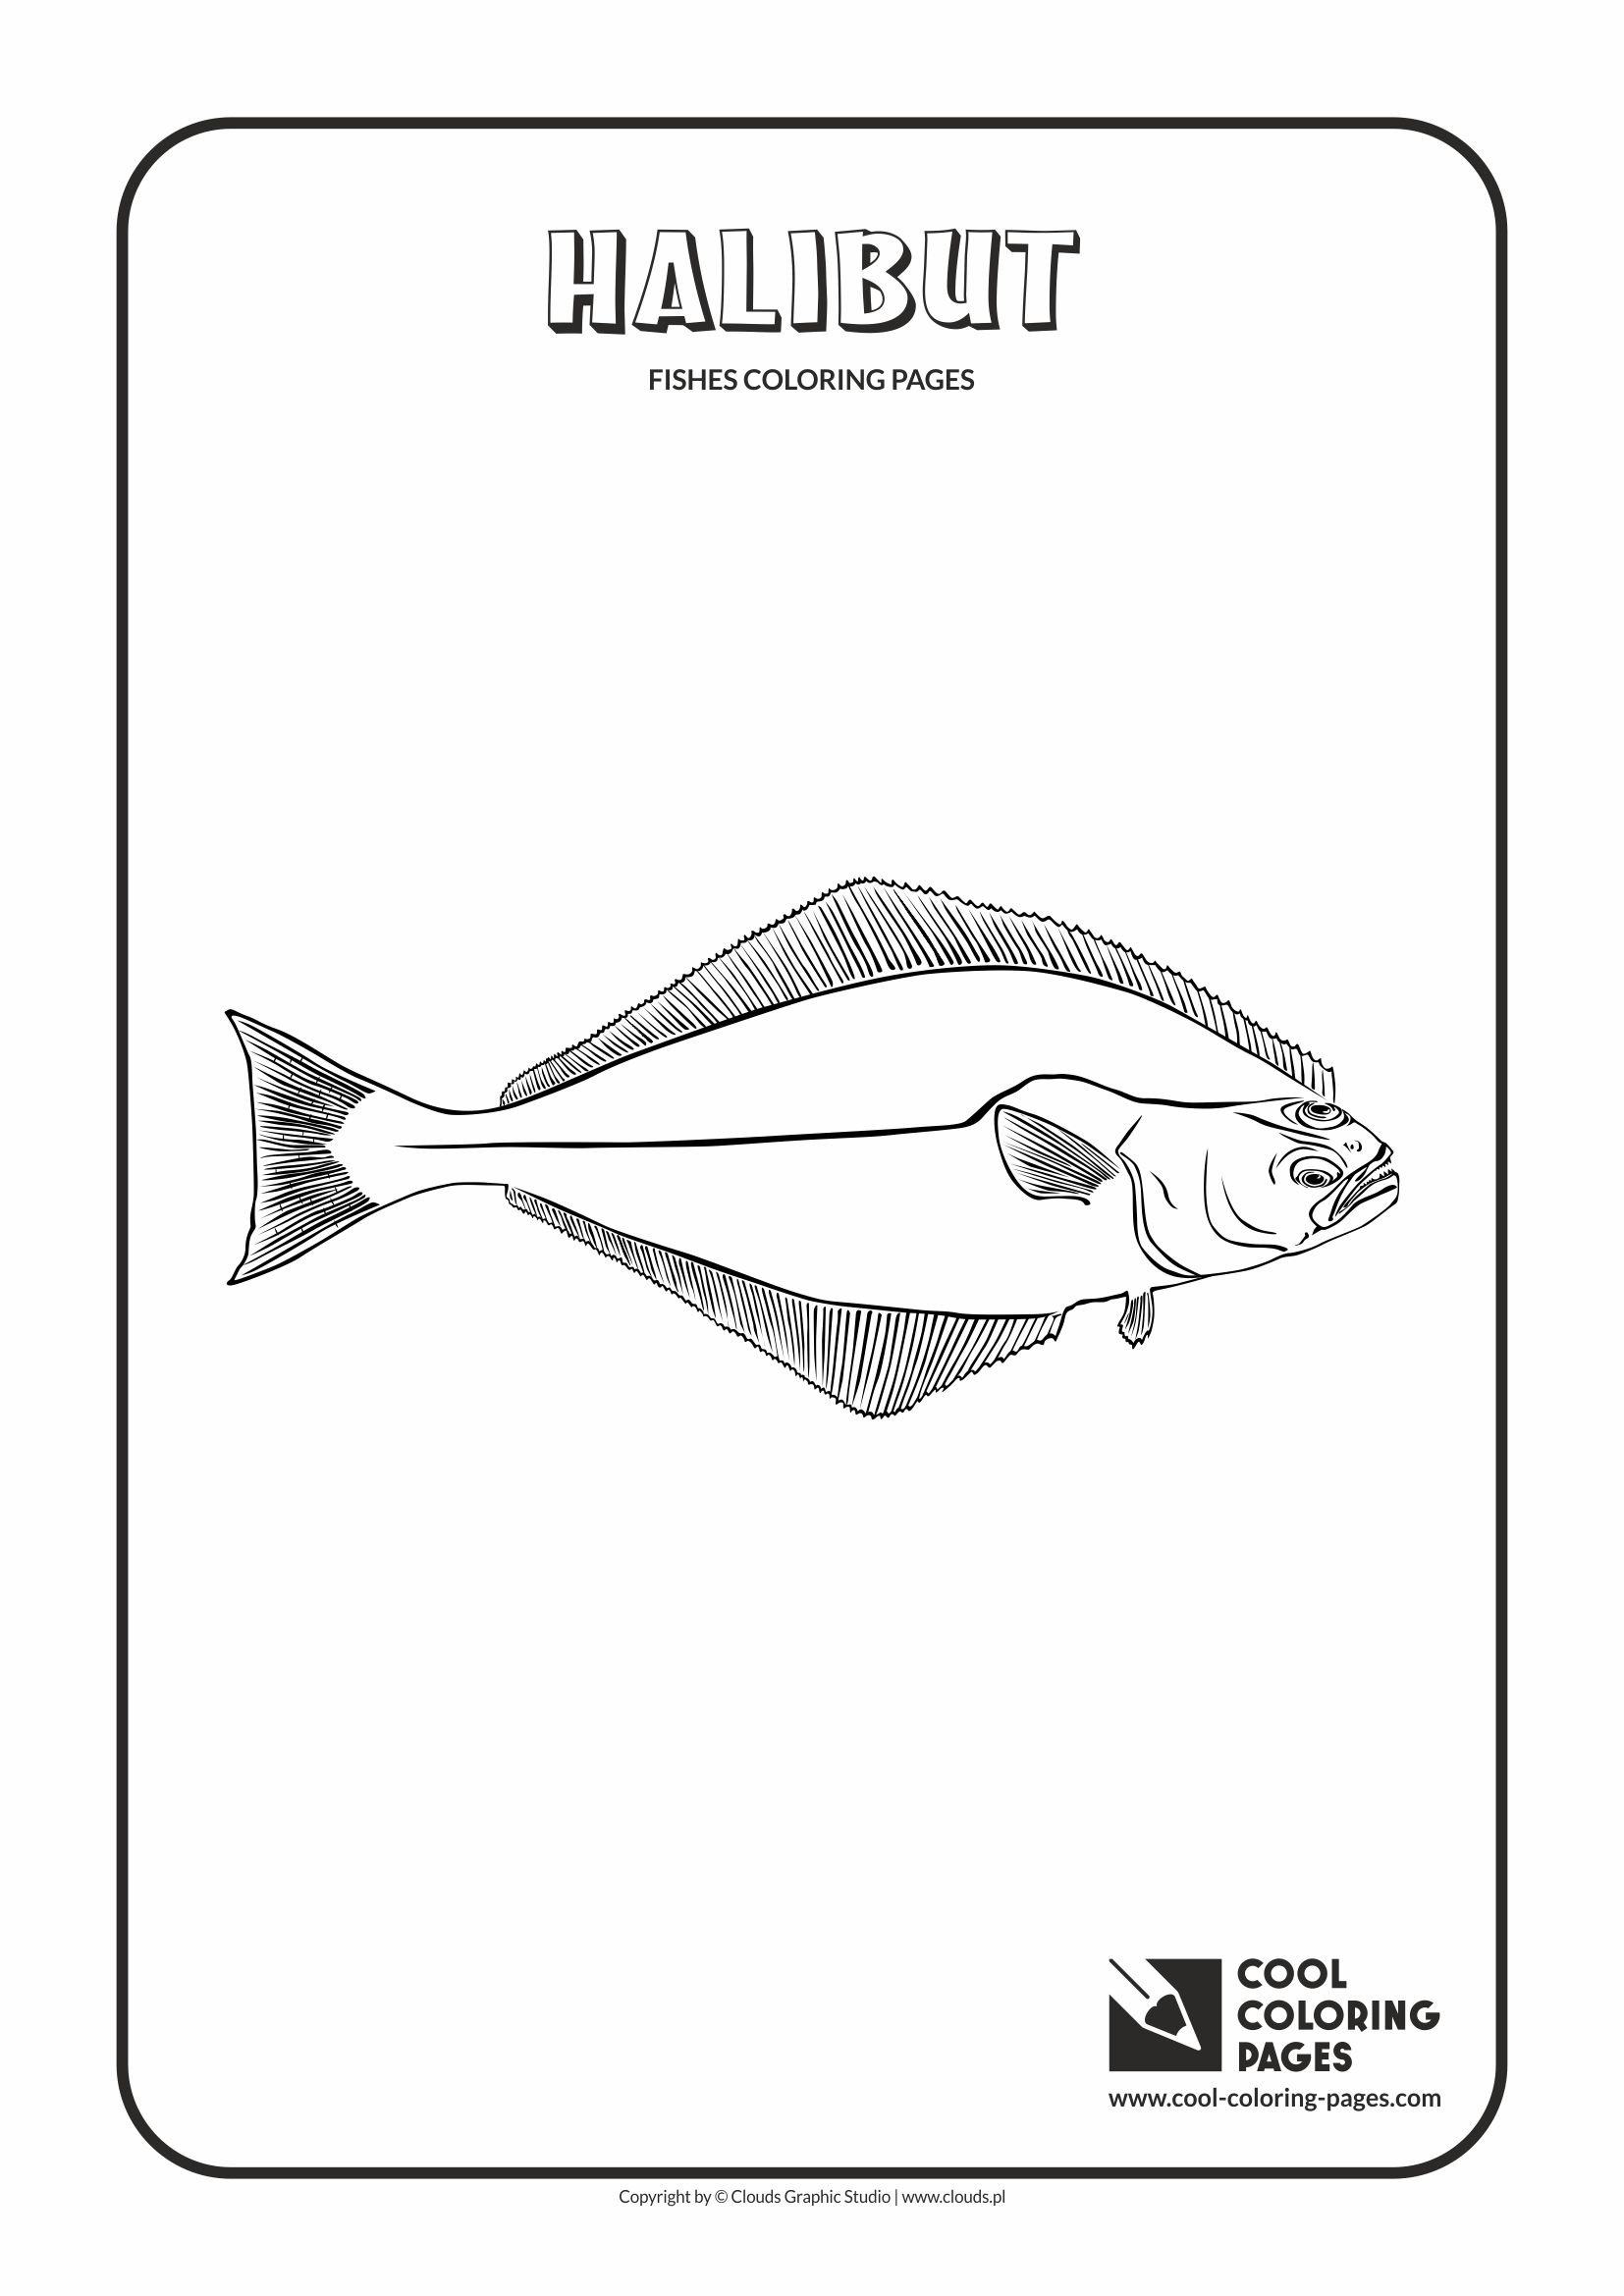 Cool Coloring Pages - Animals / Halibut / Coloring page with halibut